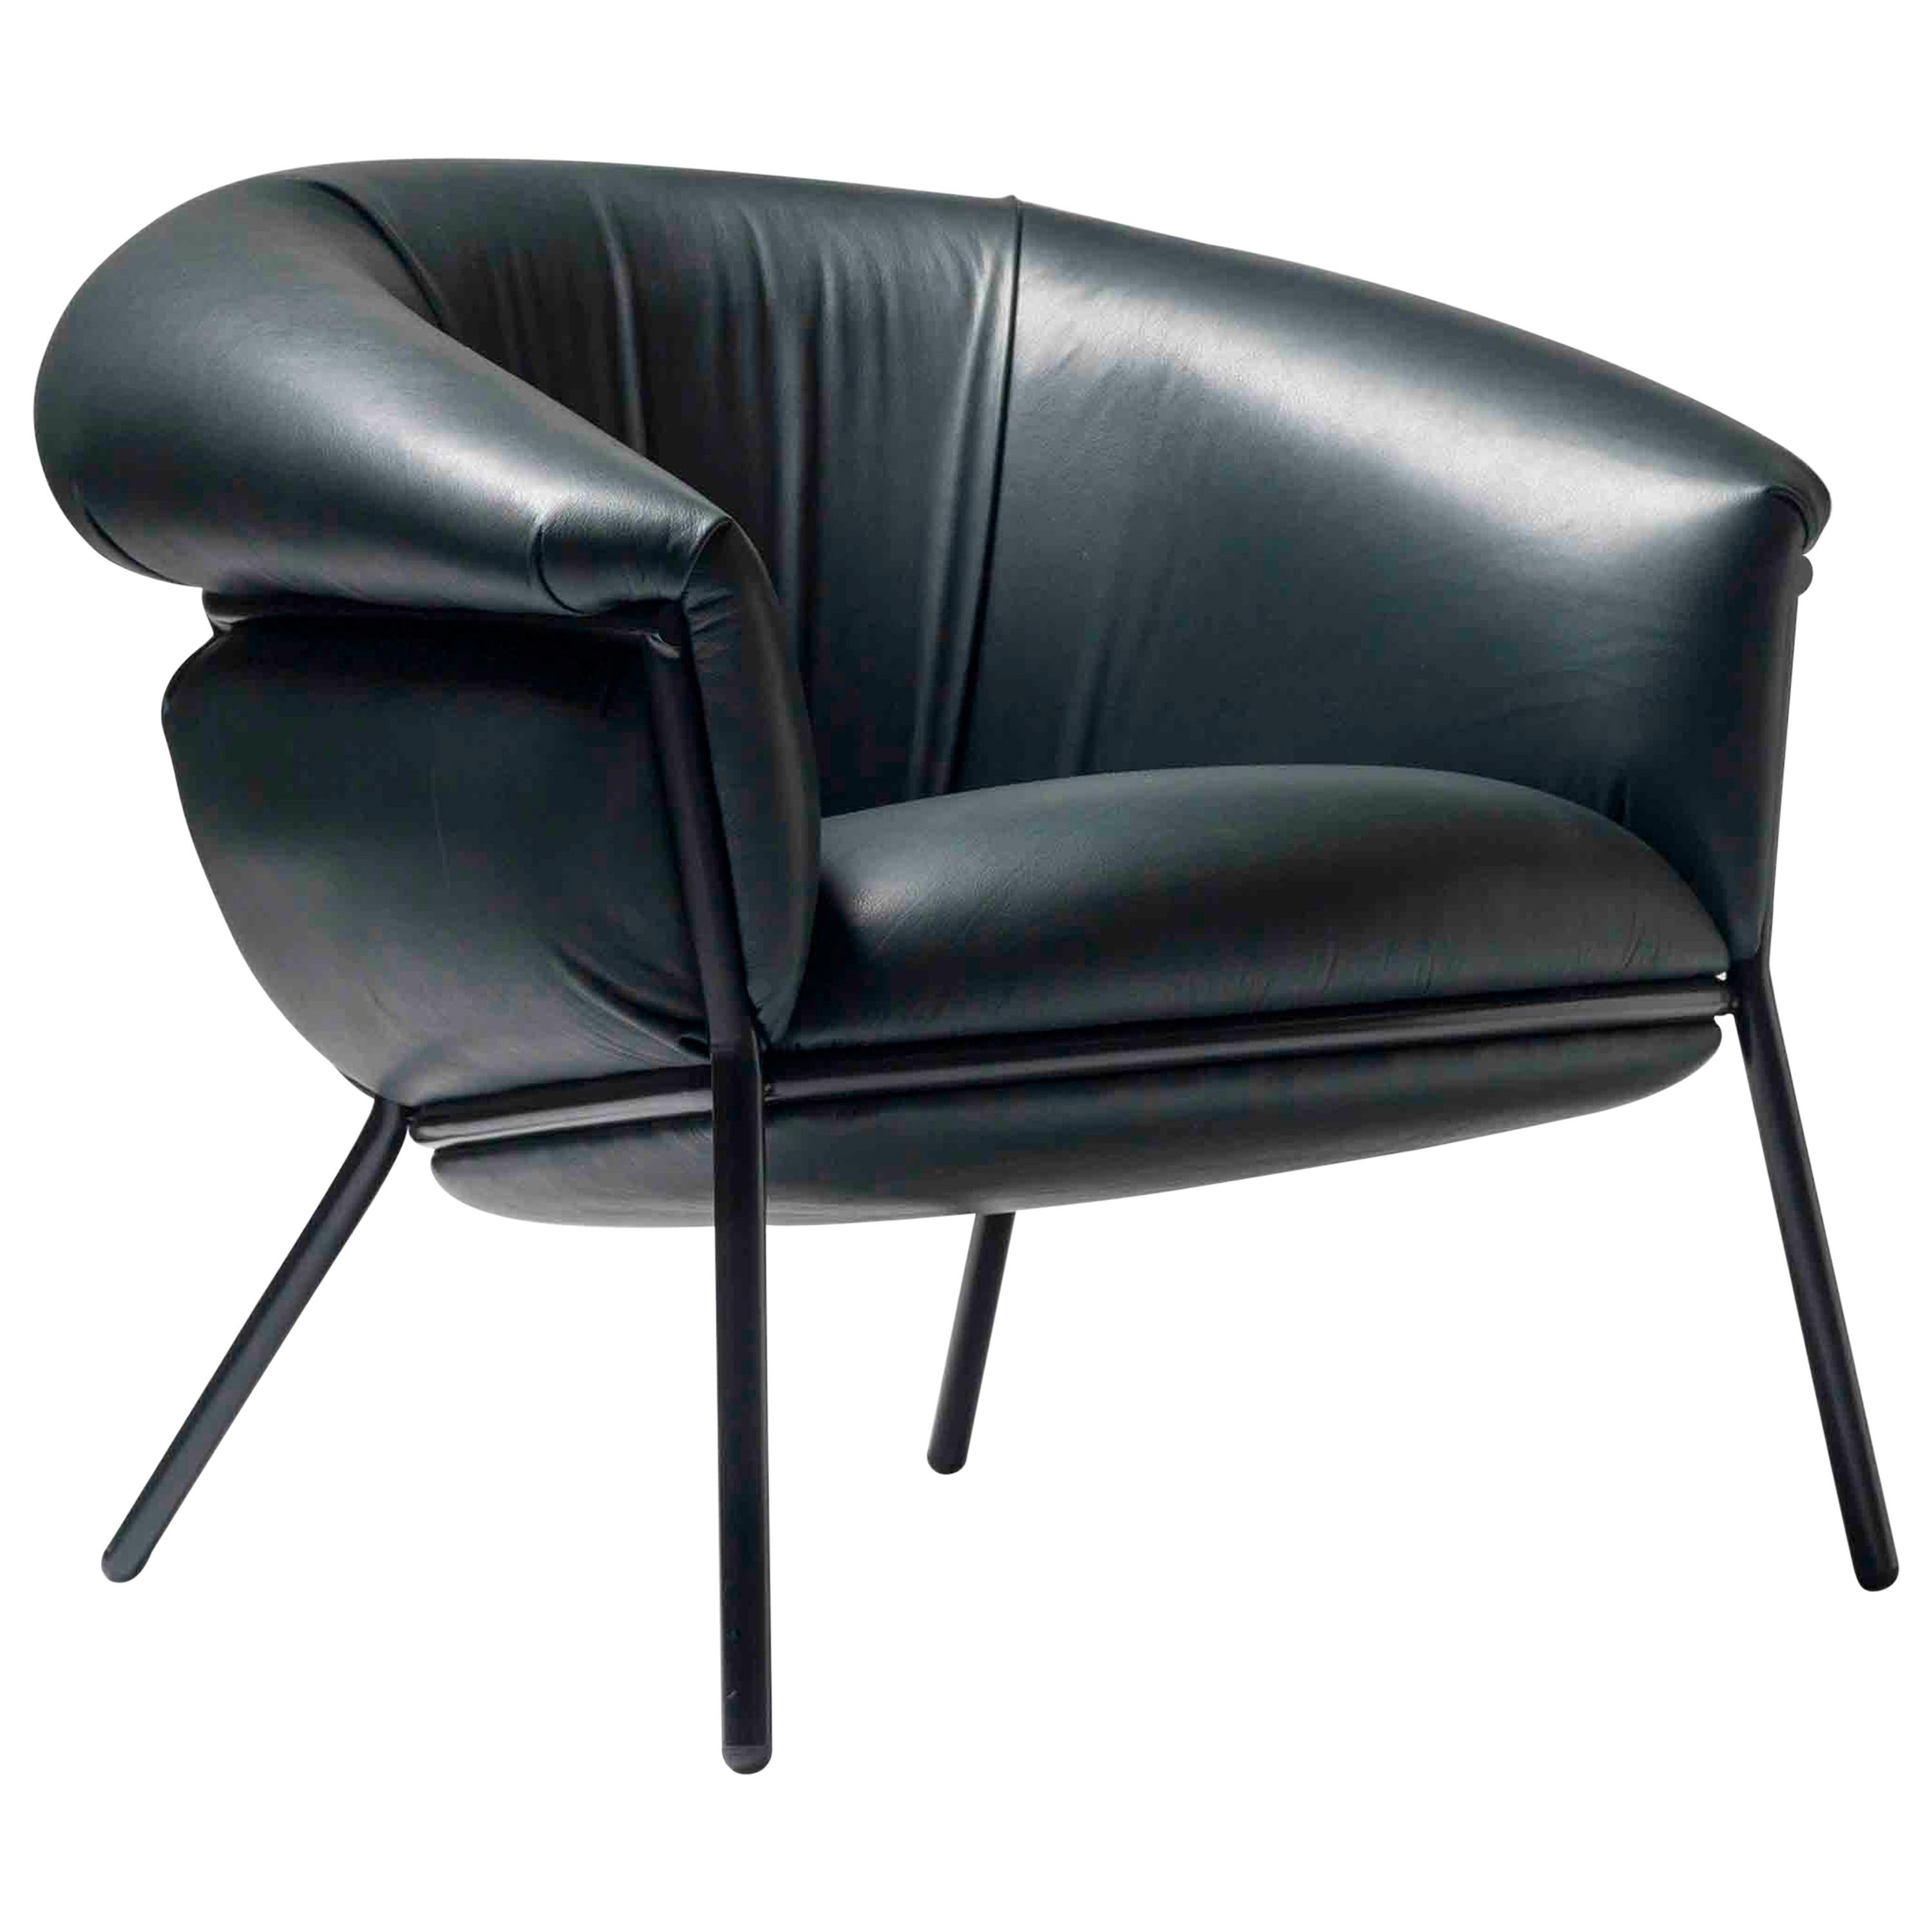 Grasso Armchair in Black Leather by BD Barcelona